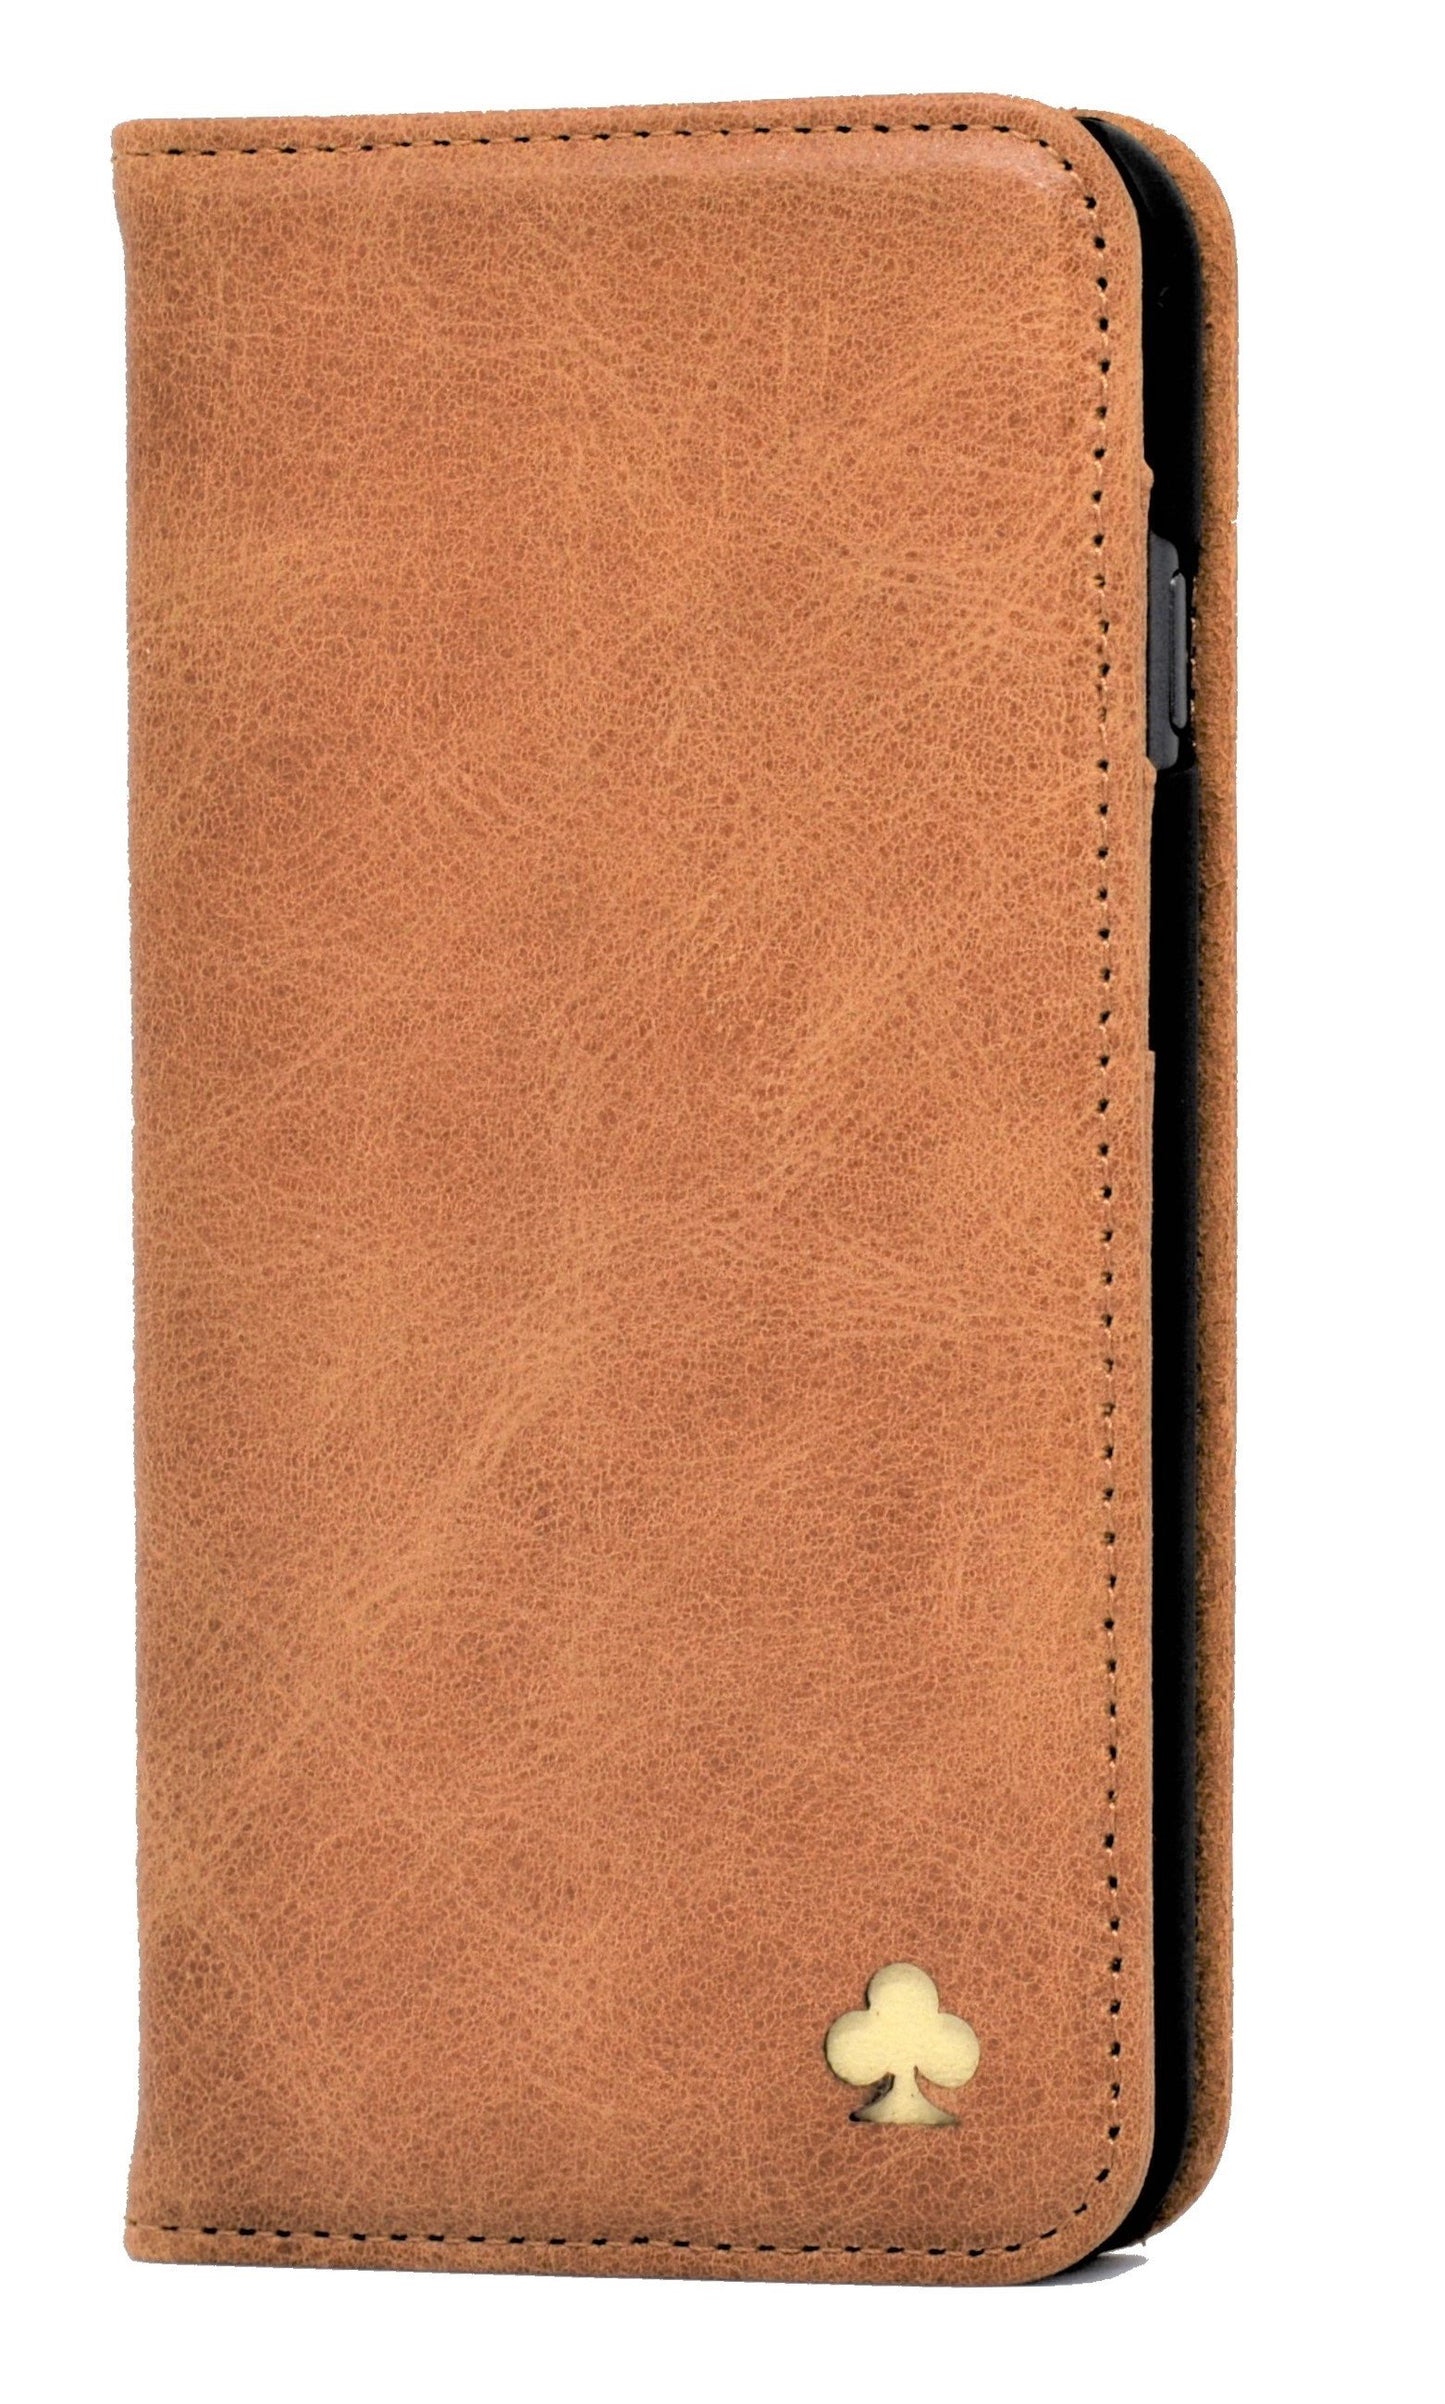 iPhone 13 Pro Leather Case. Premium Slim Genuine Leather Stand Case/Cover/Wallet (Tan)